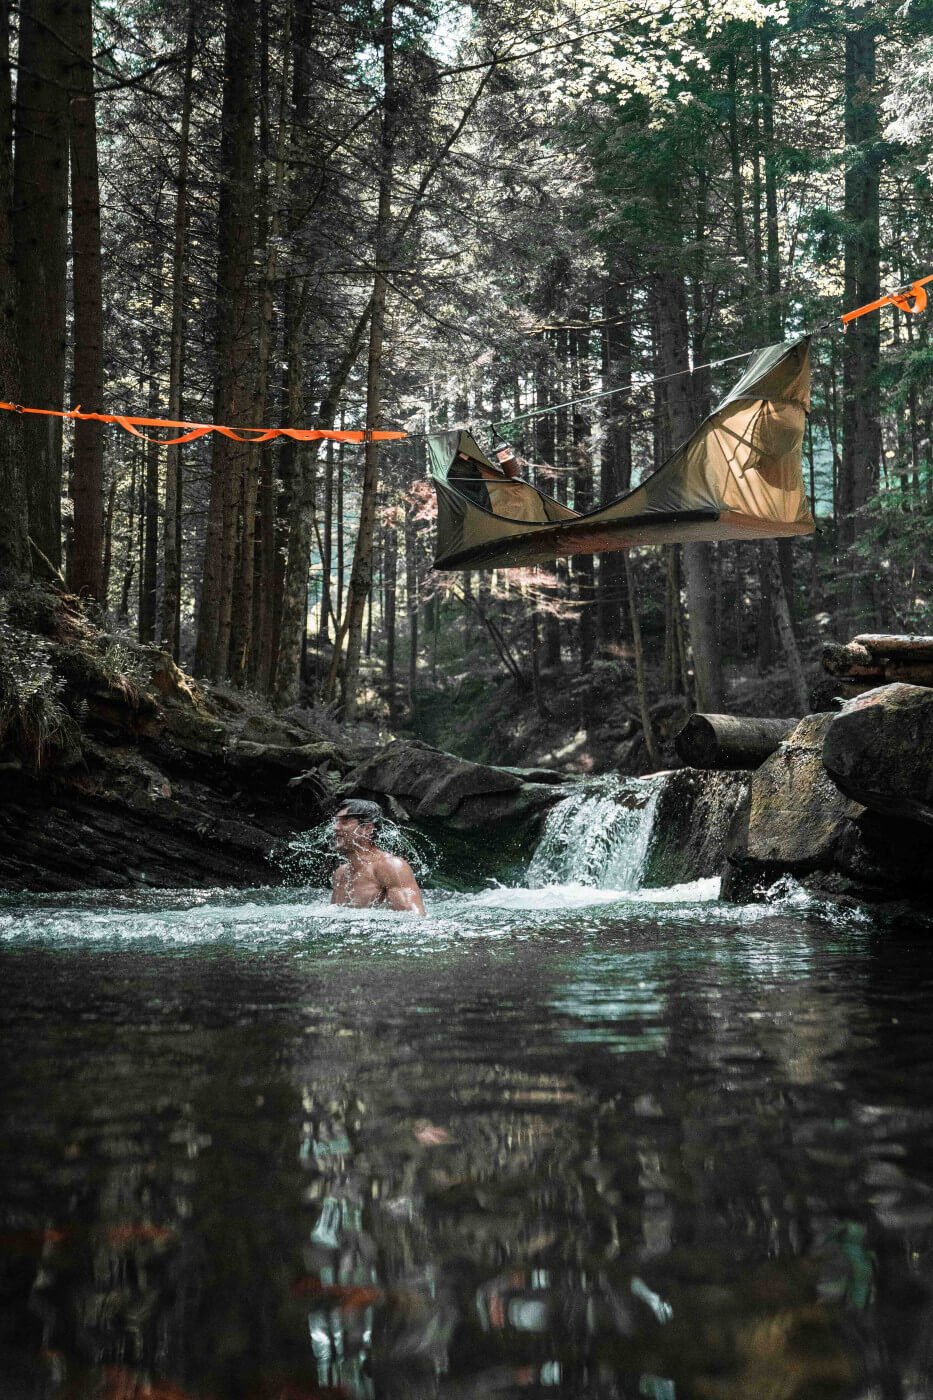 jumping out of a Haven Tent over a stream into a pool